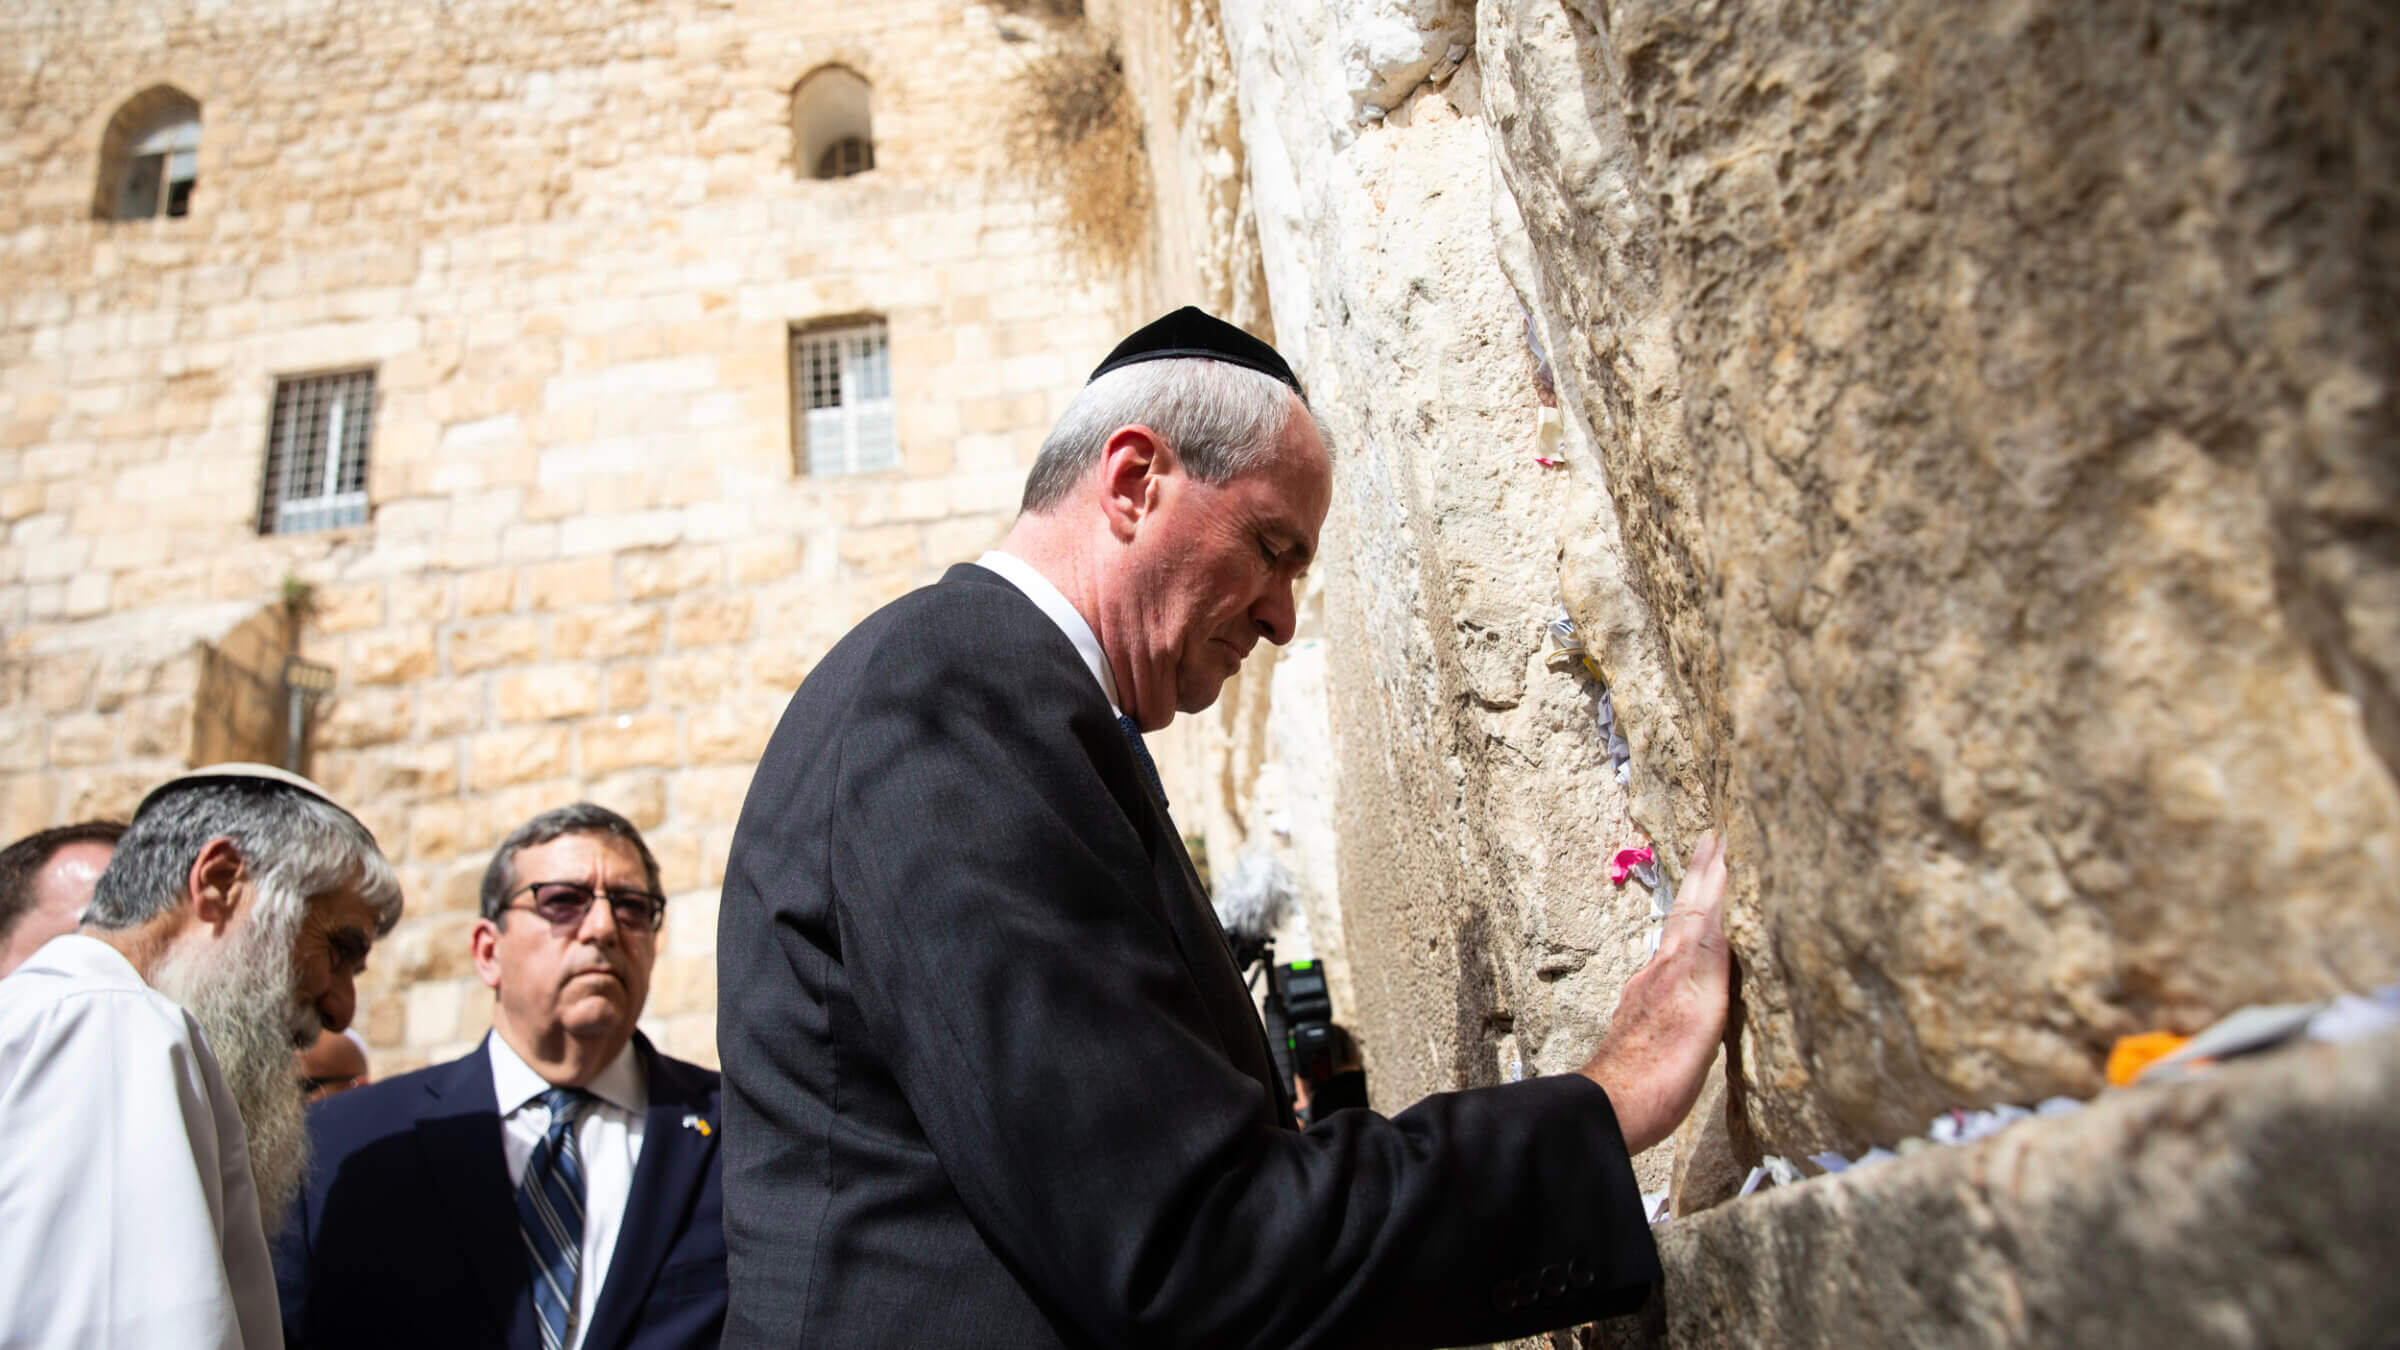 New Jersey Gov. Phil Murphy prays at the Western Wall on October 23, 2018.